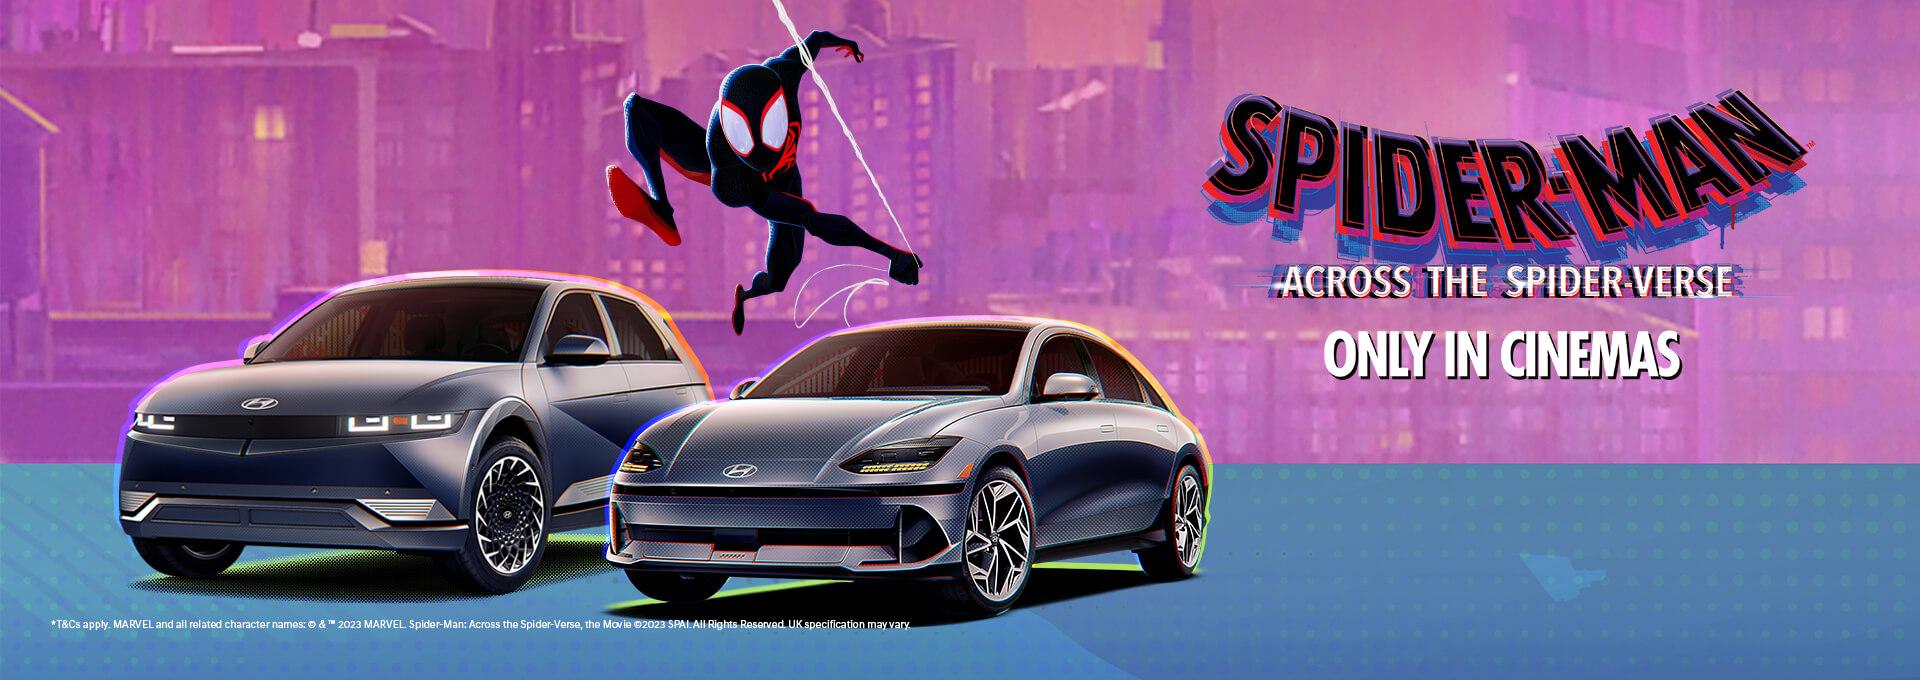 Hyundai Spider-Man test drive prize draw: Win a family trip to NYC